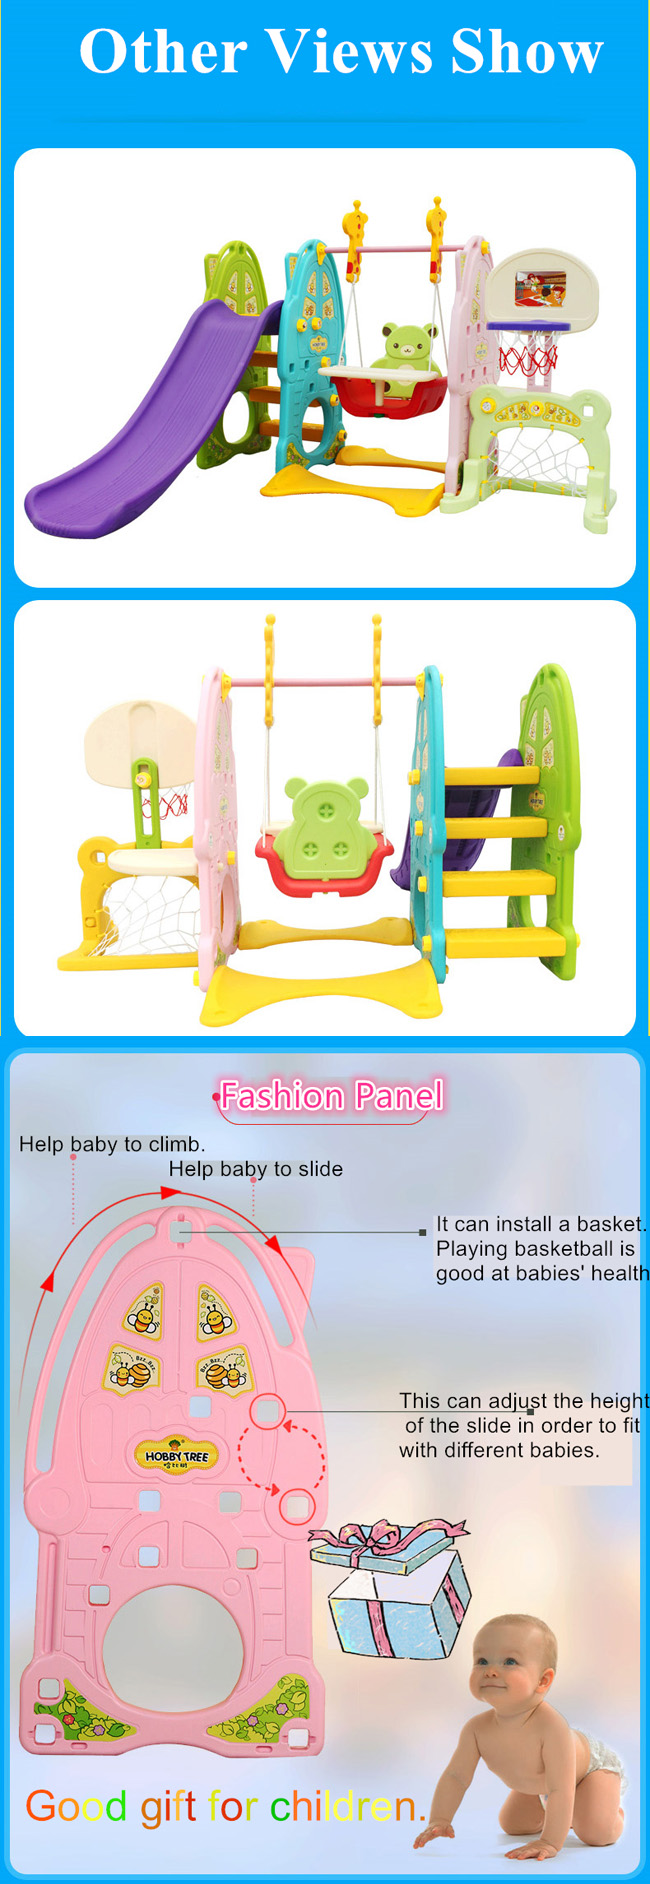 Plasti Slide and Swing for Toddler with Inflatable Ball Pit